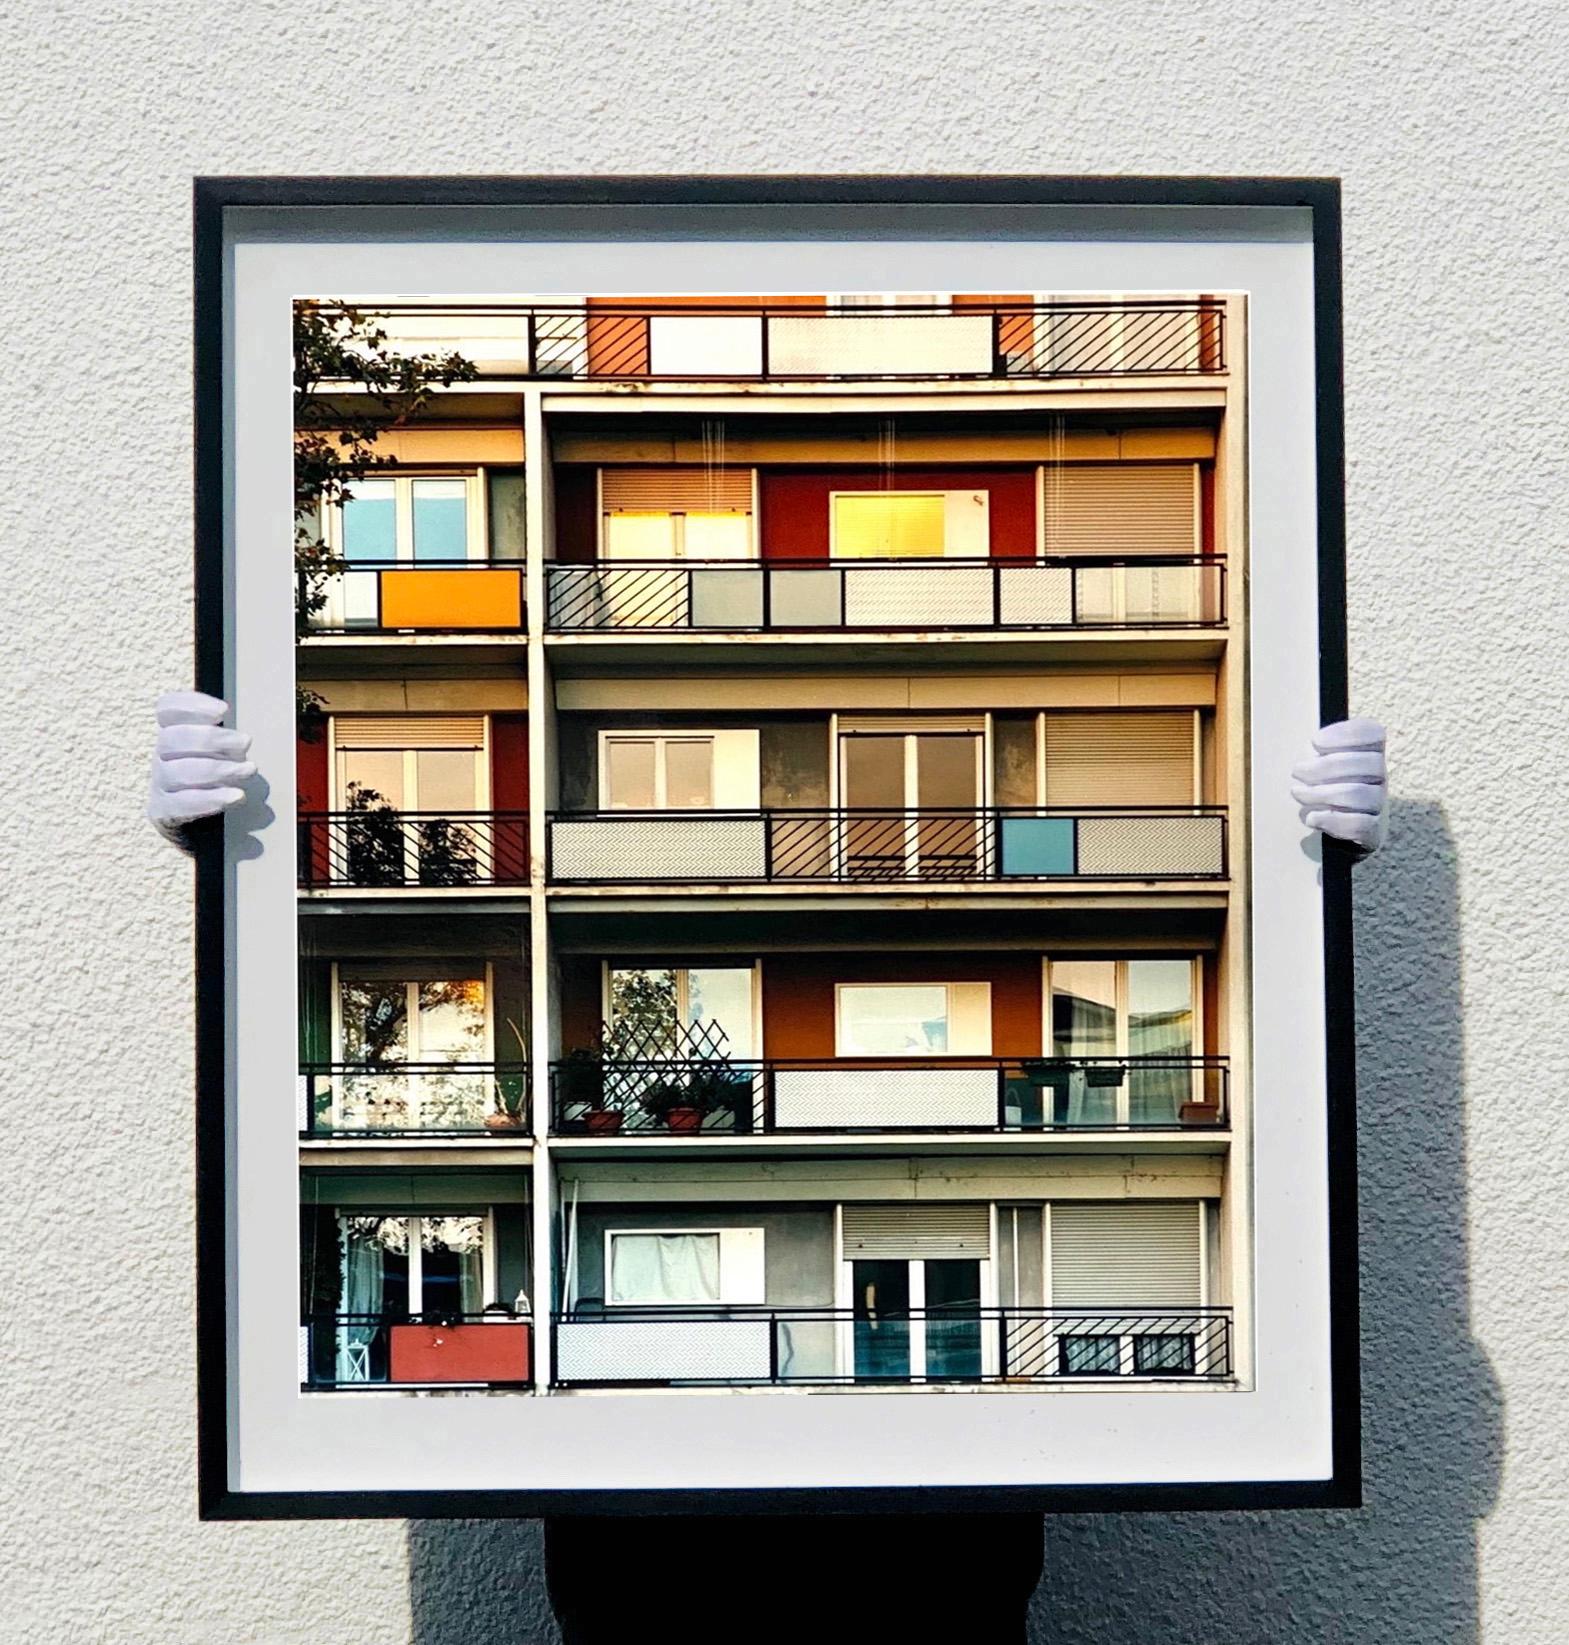 49 Via Dezza at Sunset, Milan - Conceptual Architectural Color Photography - Beige Print by Richard Heeps